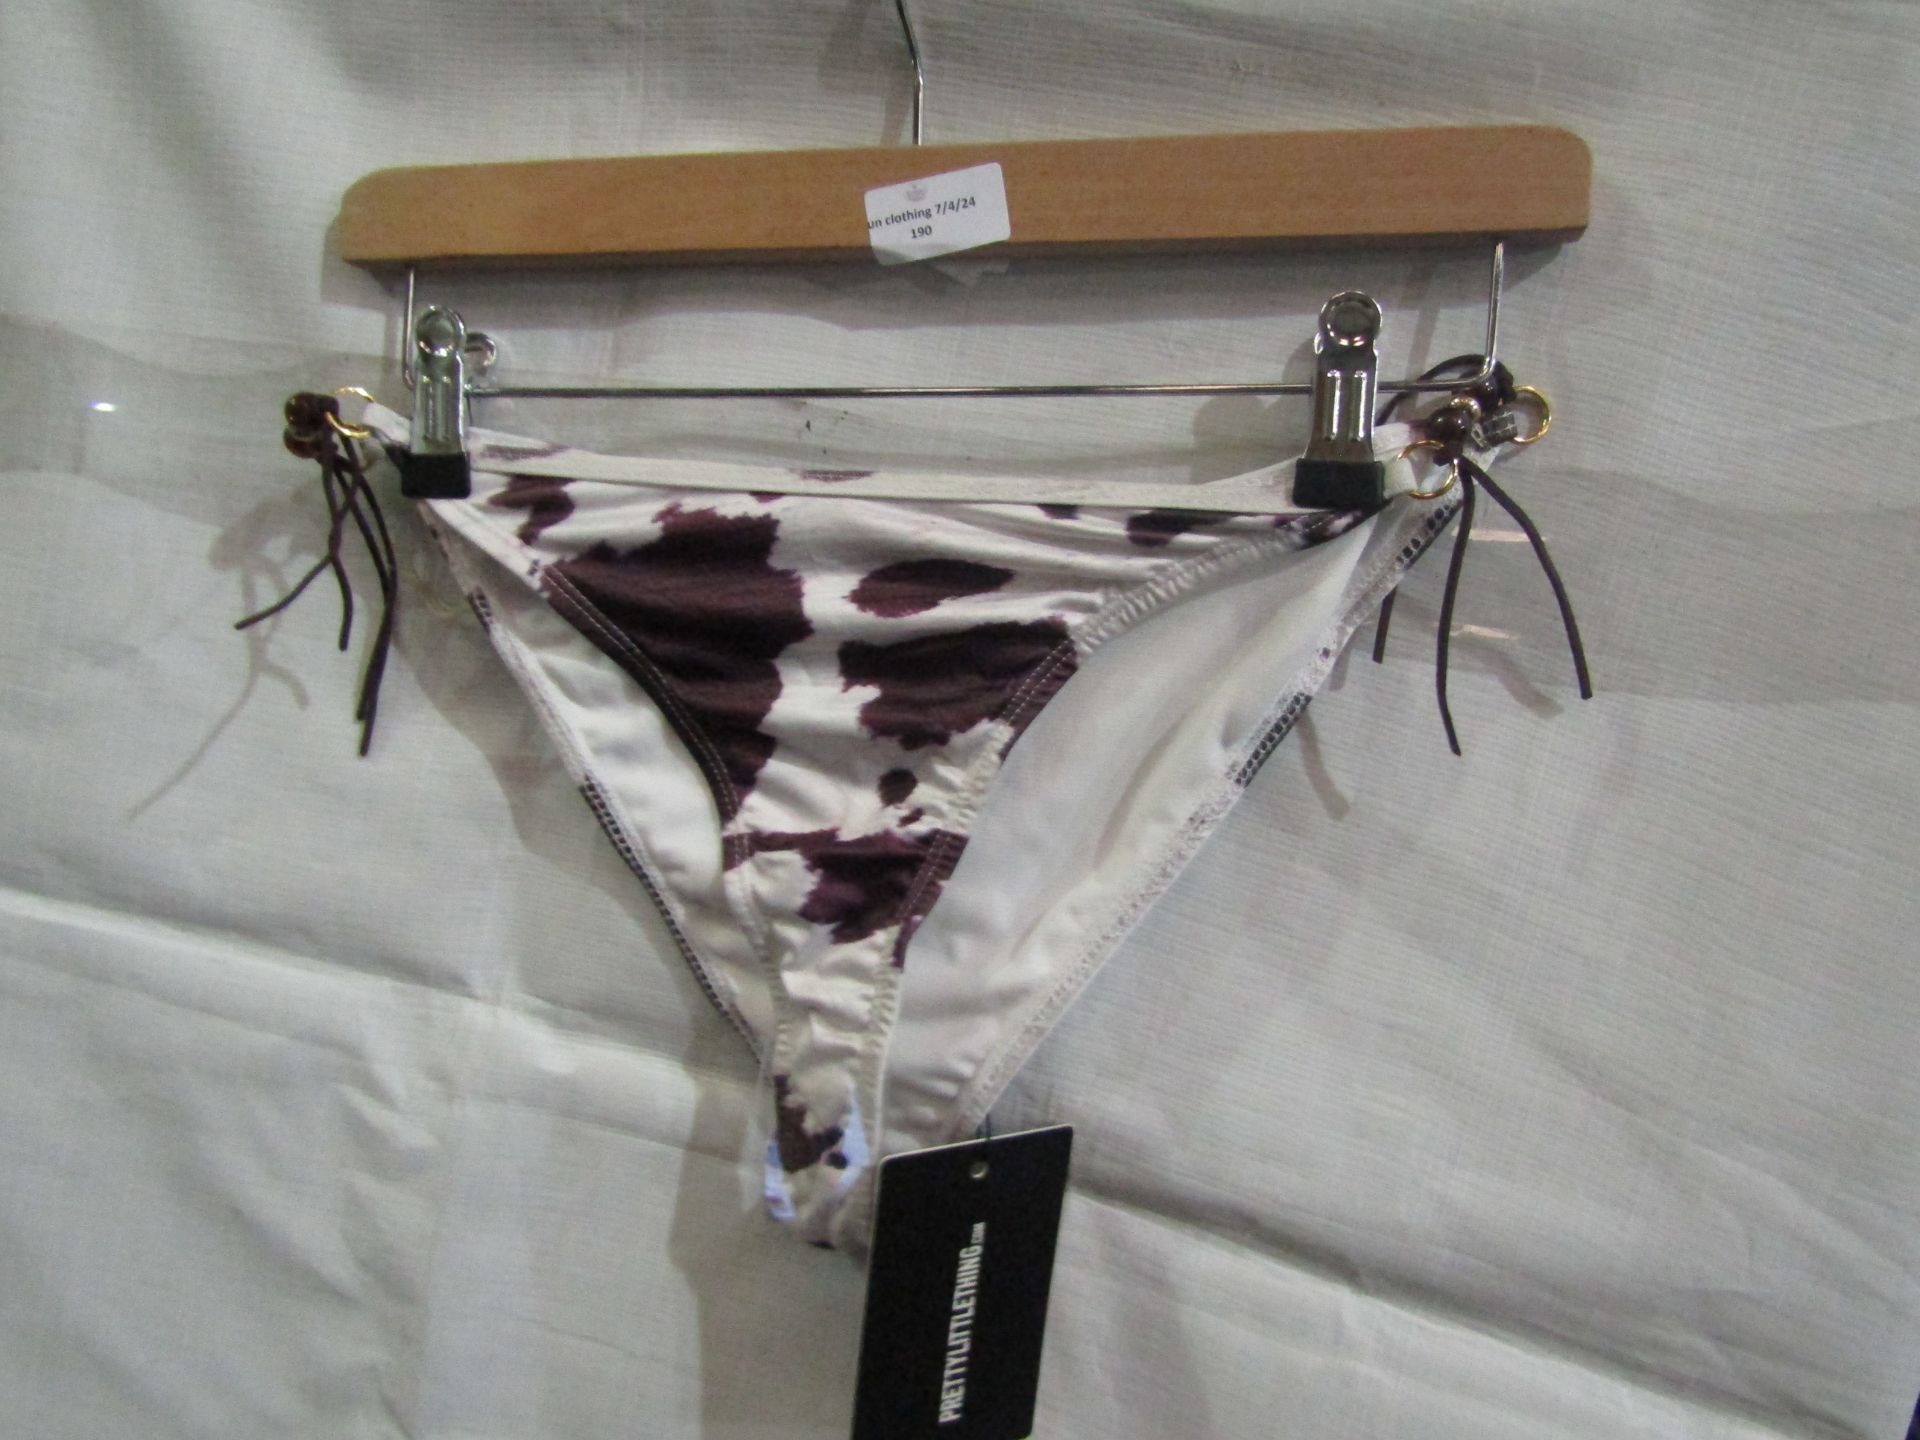 2x Pretty Little Thing Brown Cow Print Beaded Tie Bikini"s - Size 8, New & Packaged.